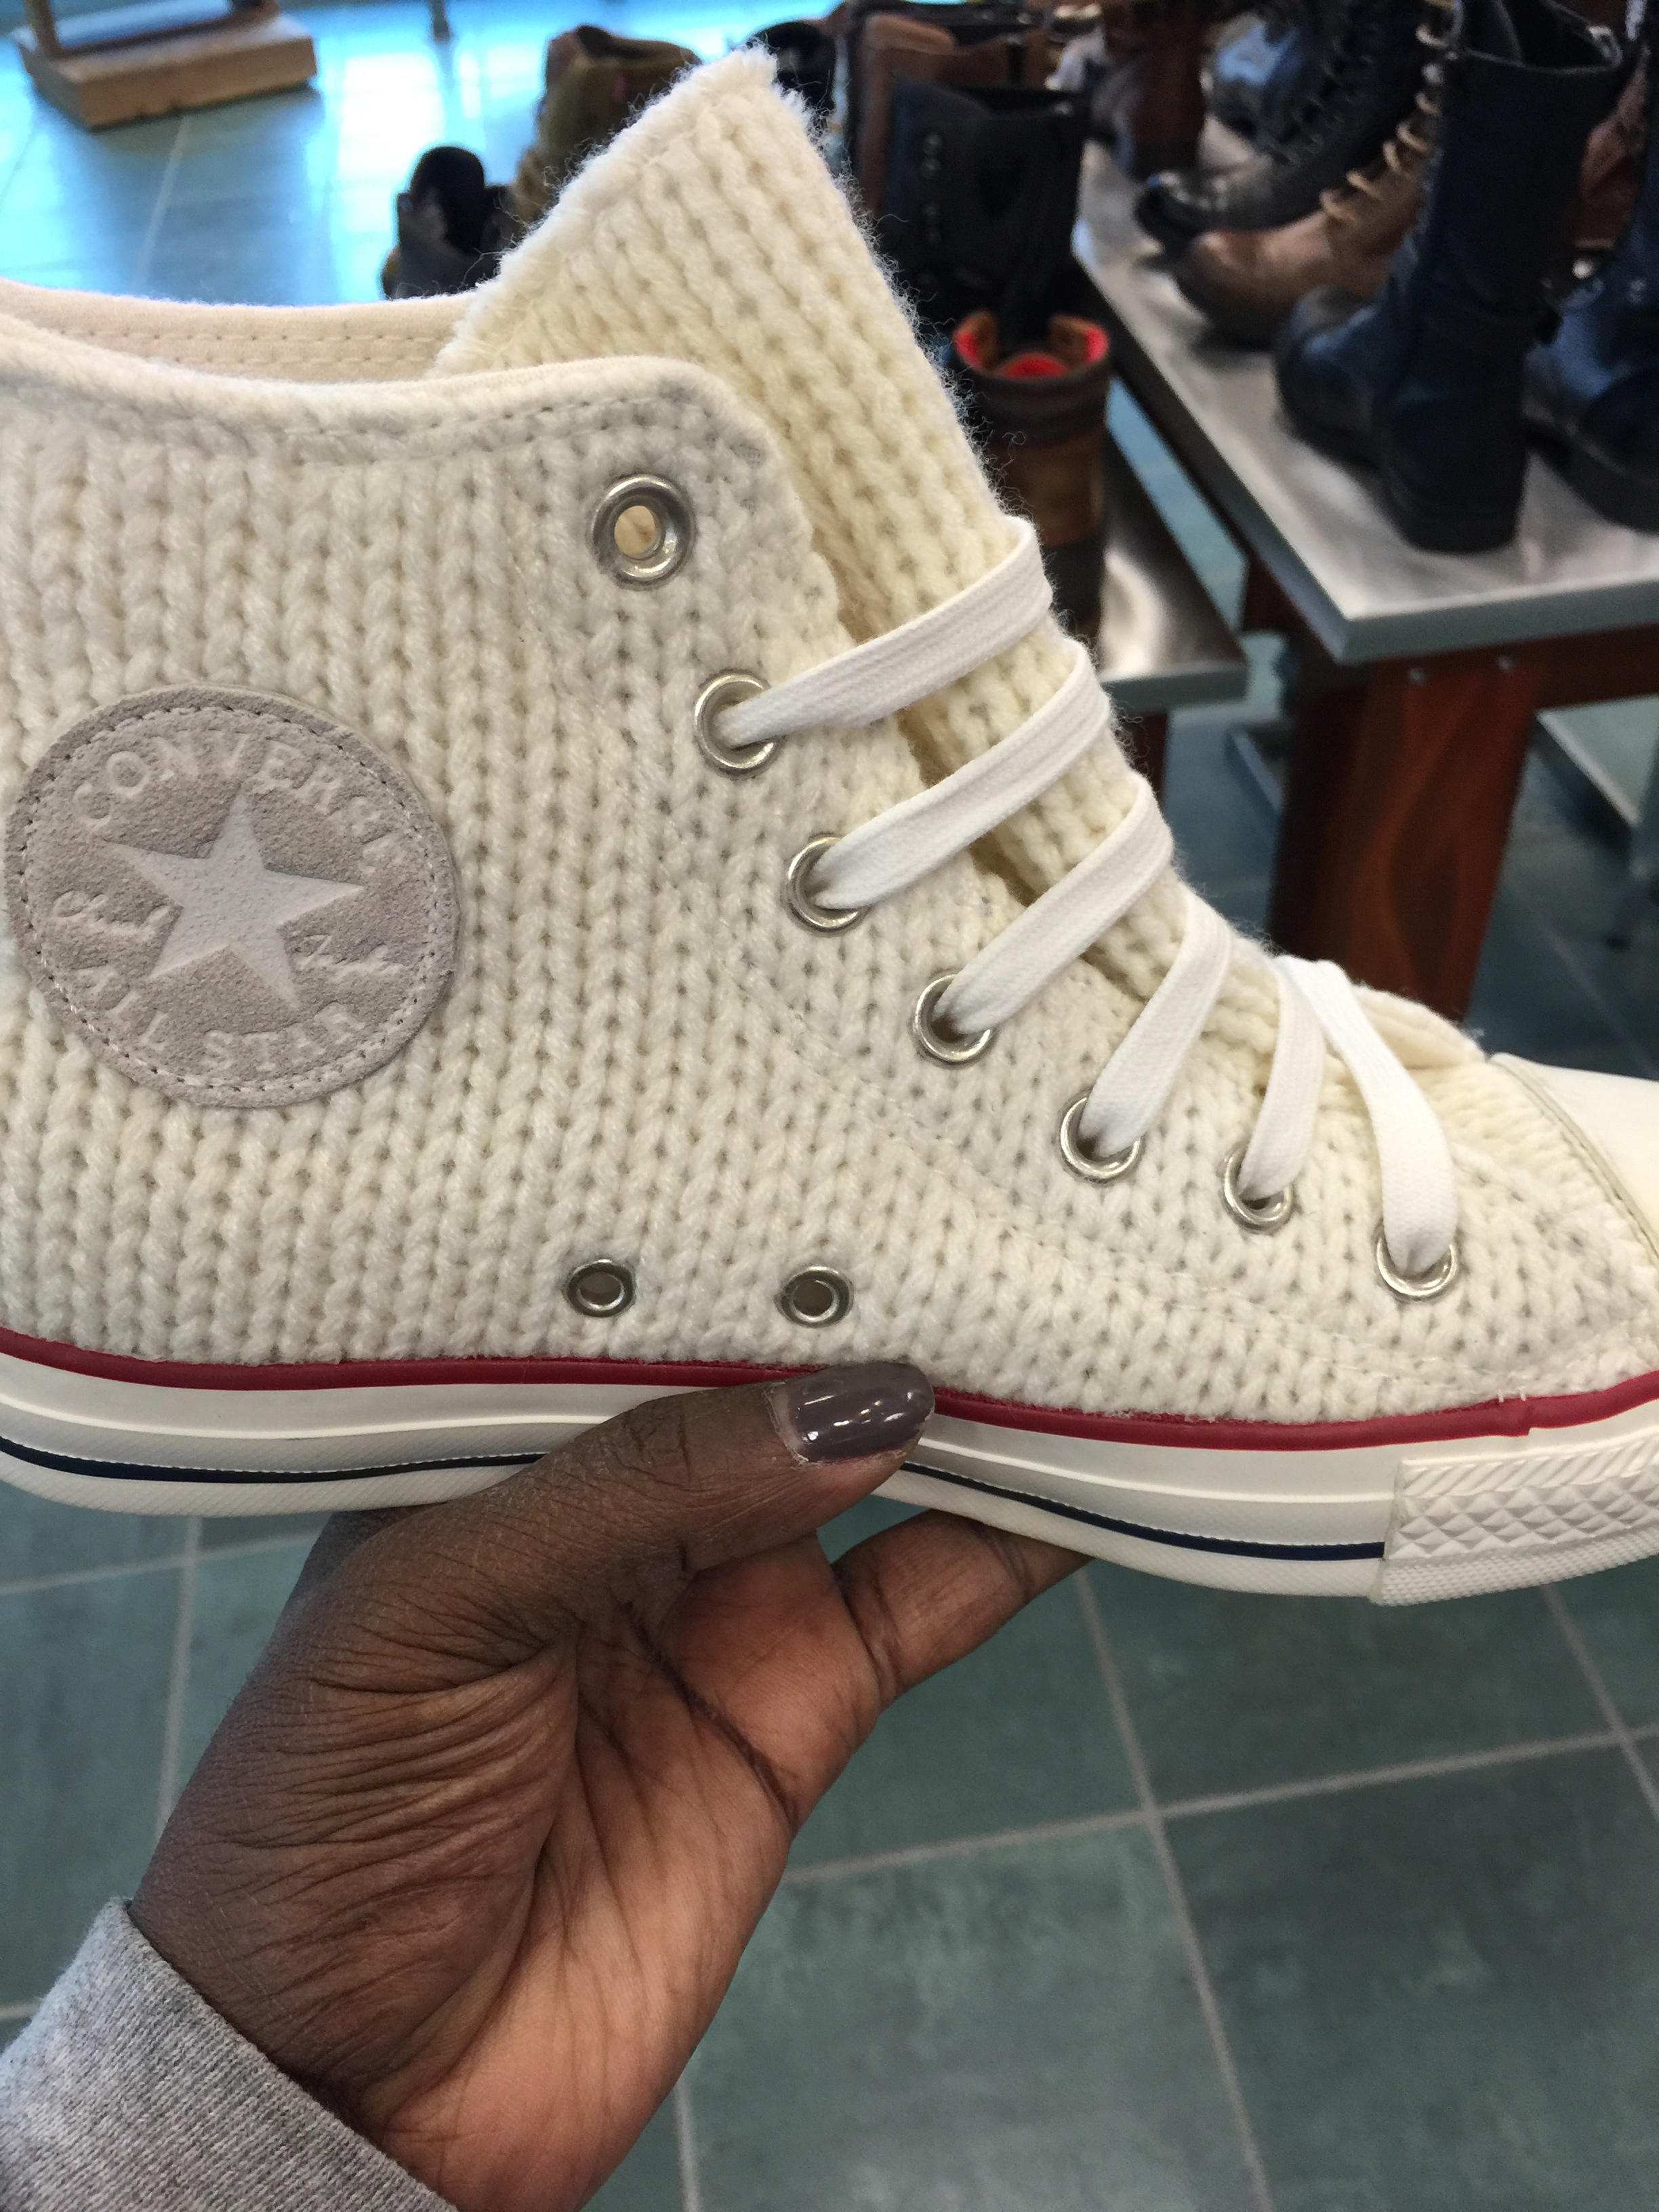 converse all star perforated